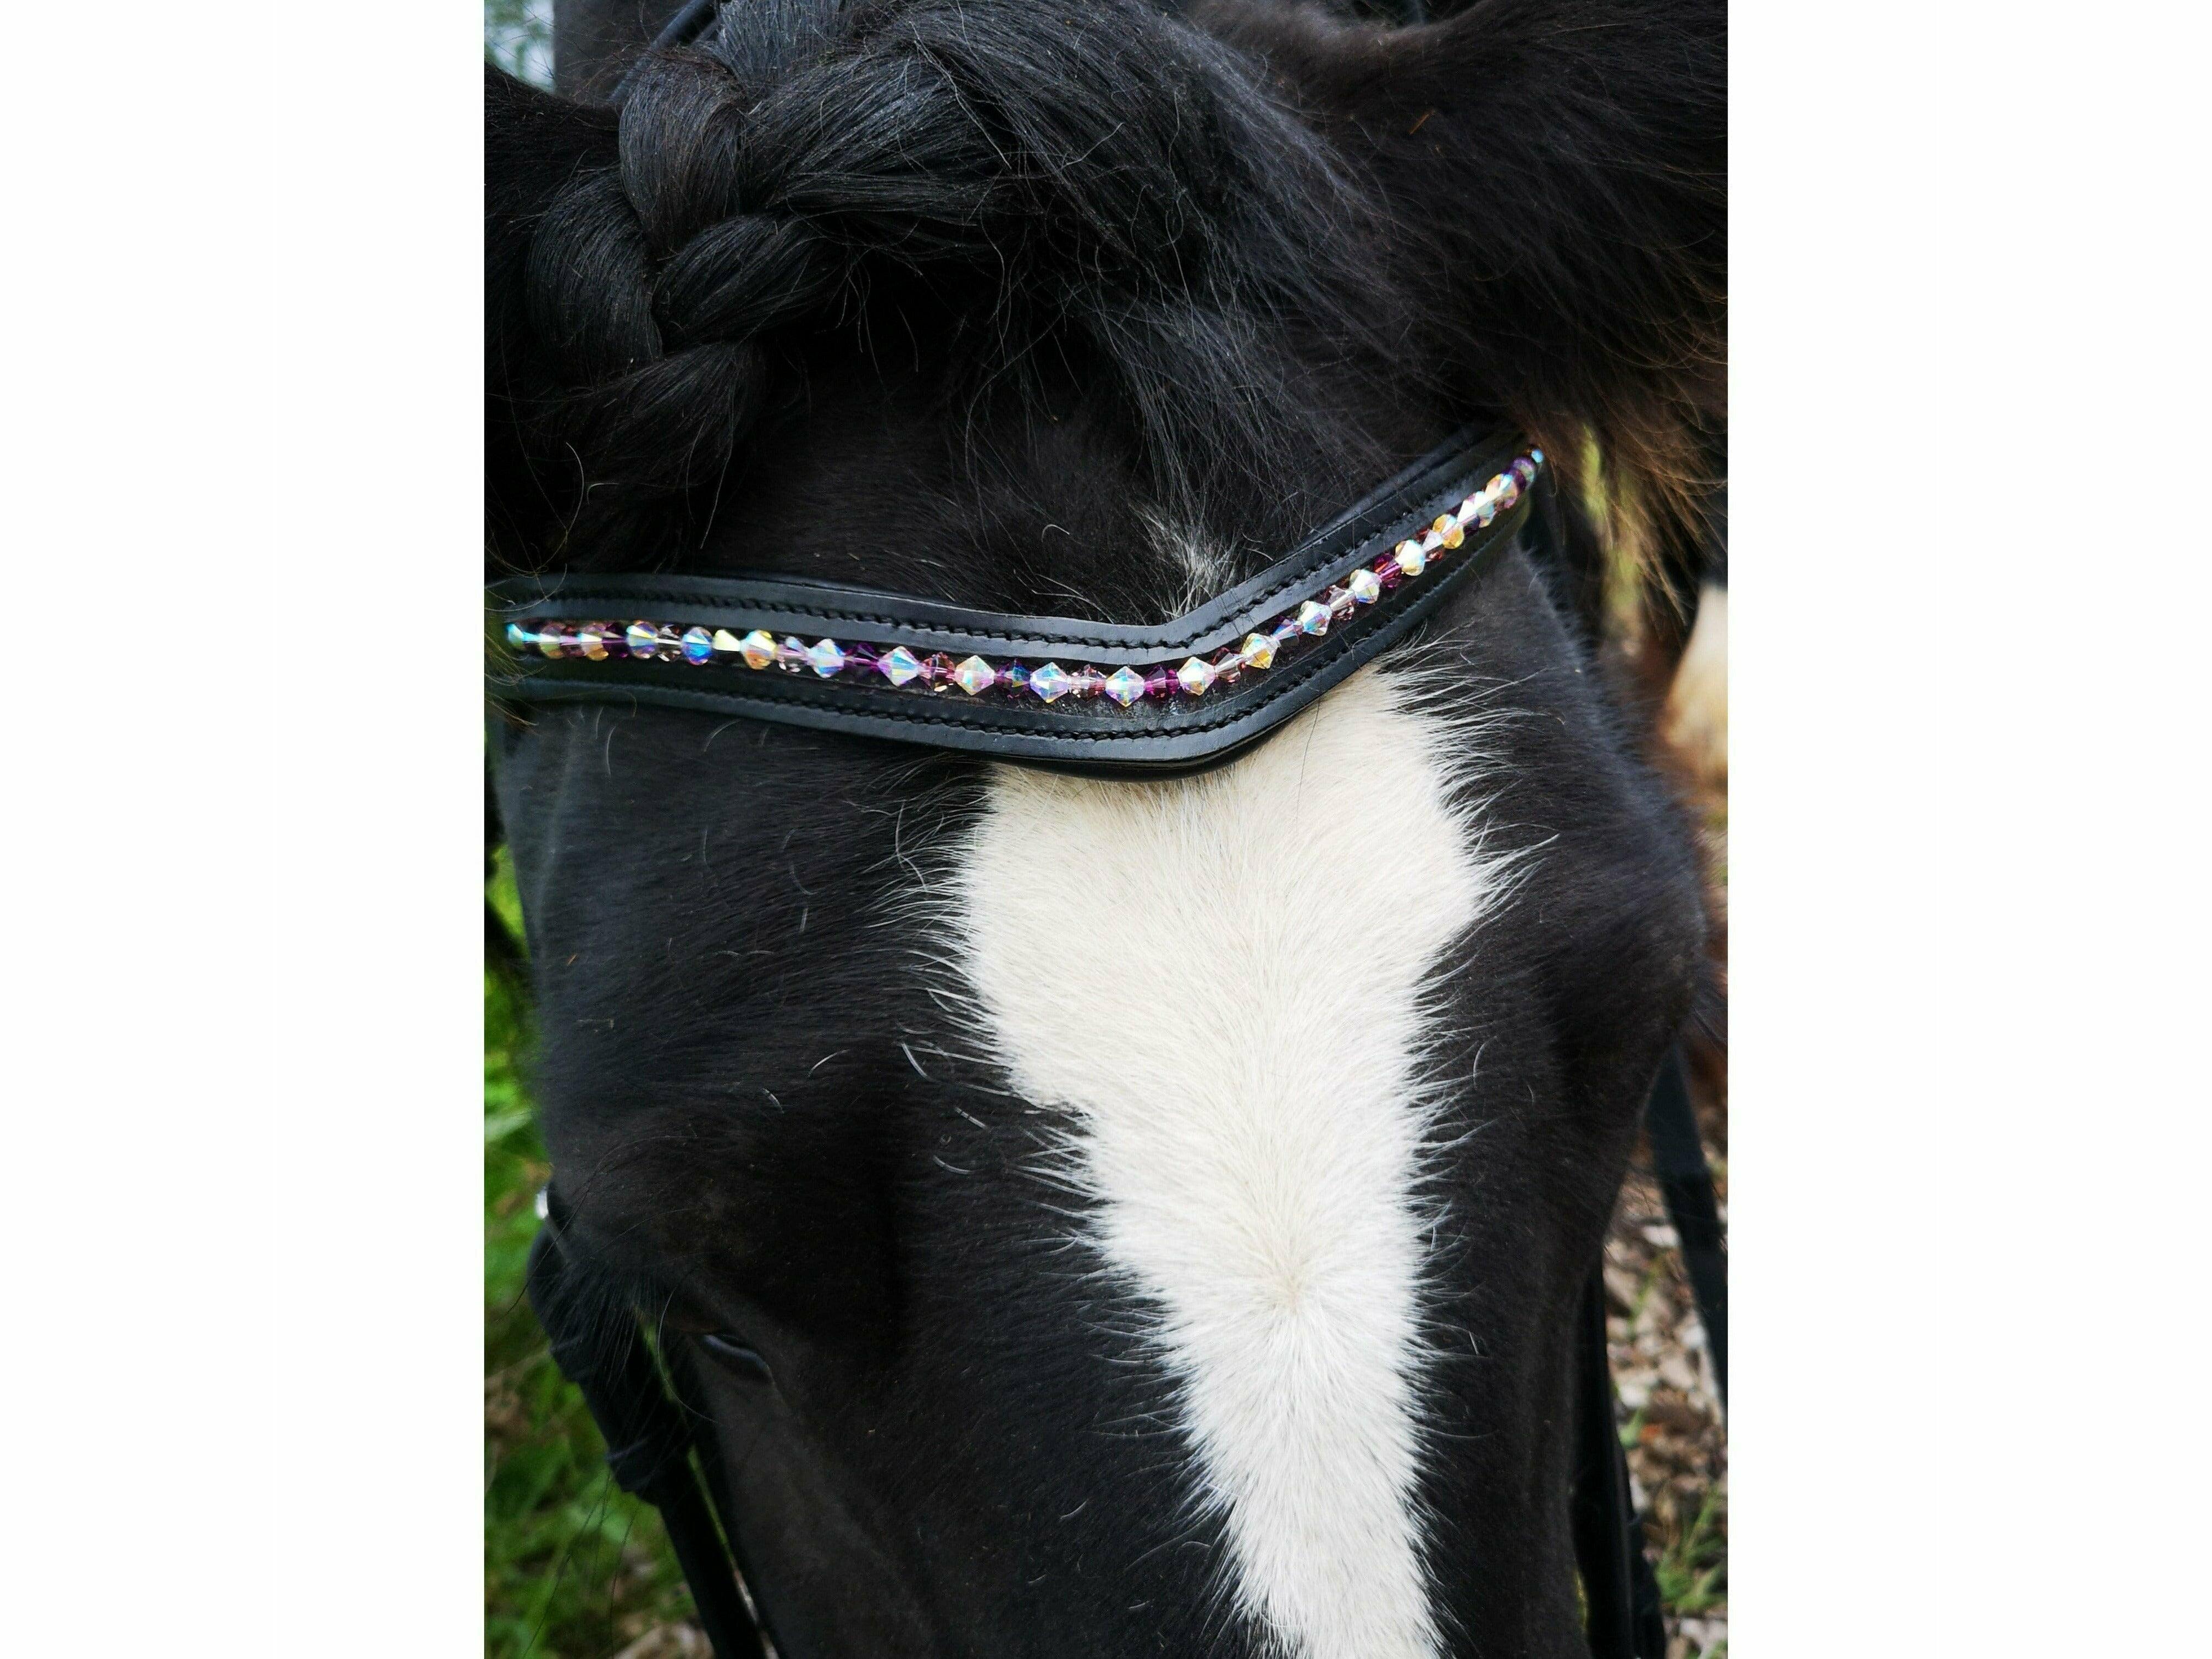 Daisy-Chain Equestrian Browband Custom-made Leather Browband with Preciosa Crystal beads